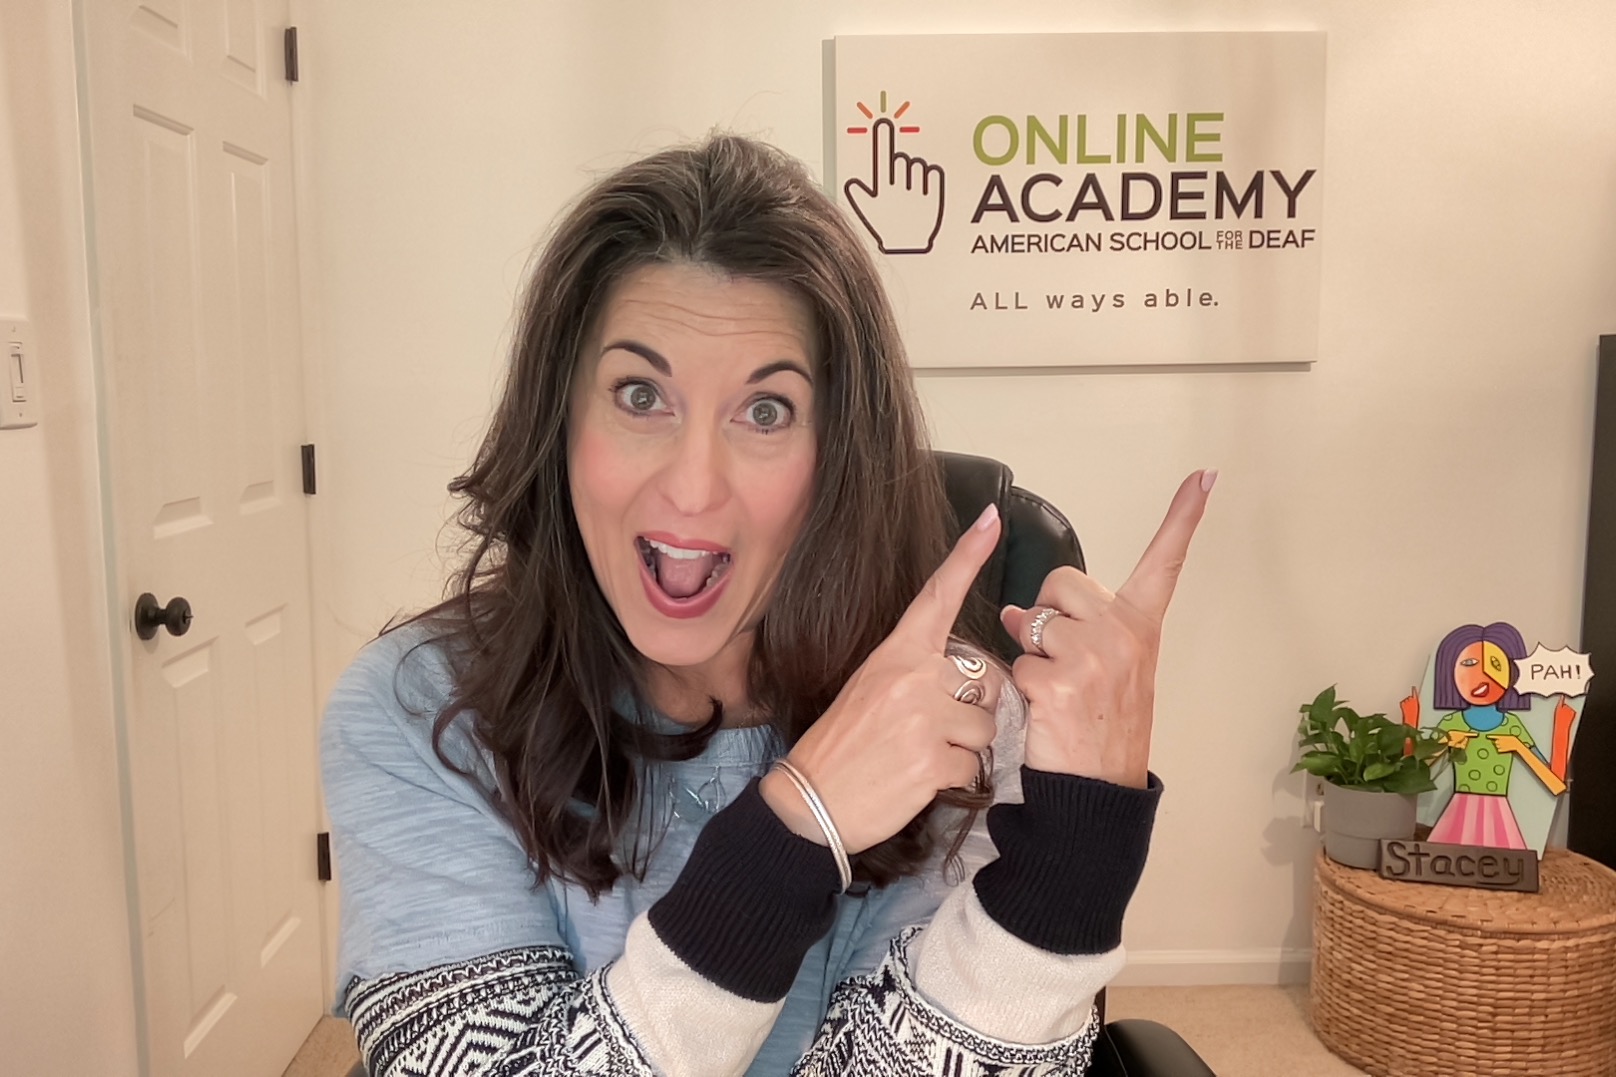 Enthusiastic white woman in a multi-patterned top and long dark hair, pointing toward a sign behind her saying "Online Academic American School for the Deaf ALL ways able." with ASD's hand logo on it